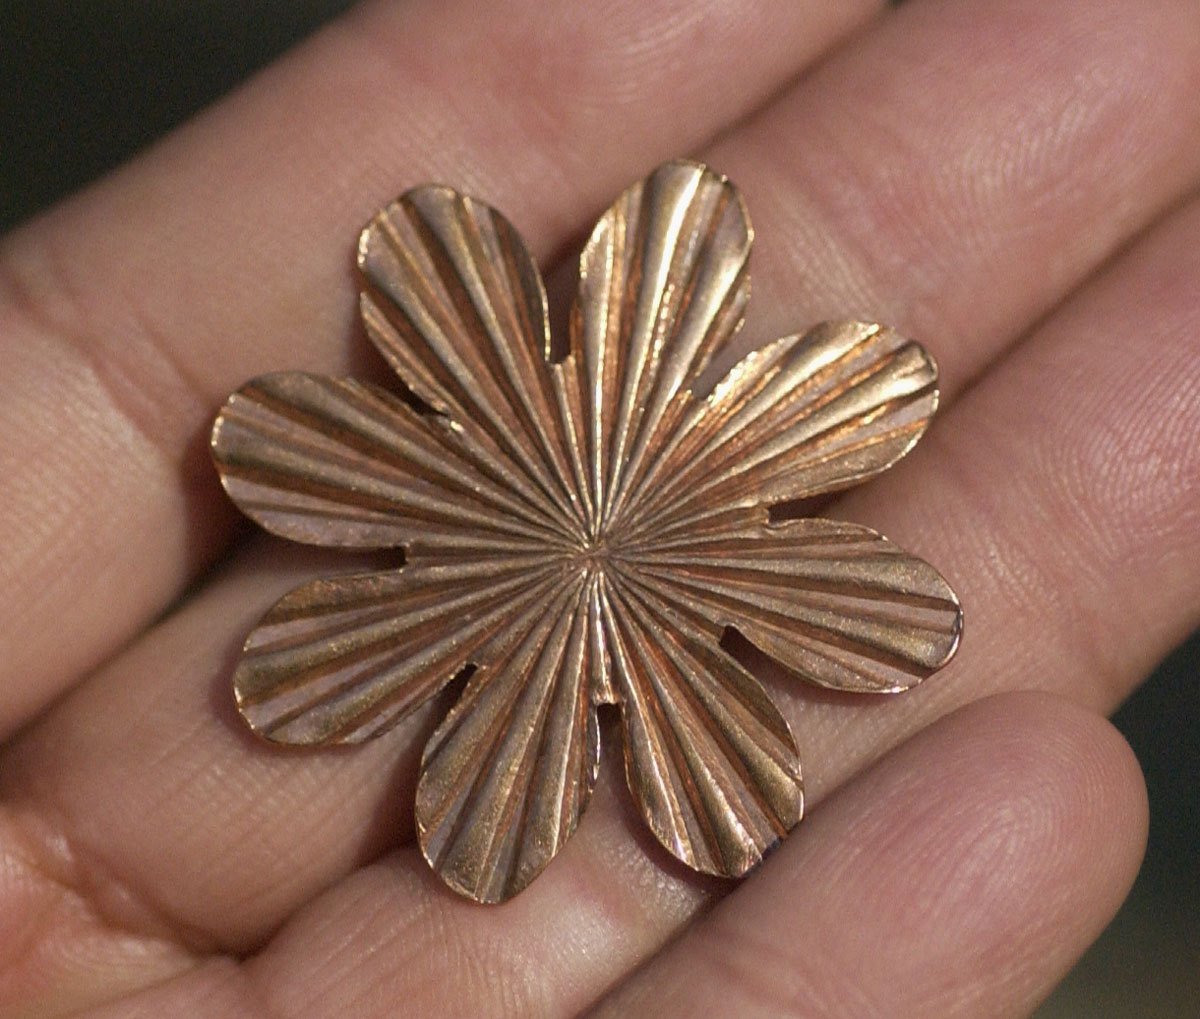 Sunflower Ruffled Pattern Cutout for Blanks Enameling Stamping Texturing Variety of Metals - 3 Pieces